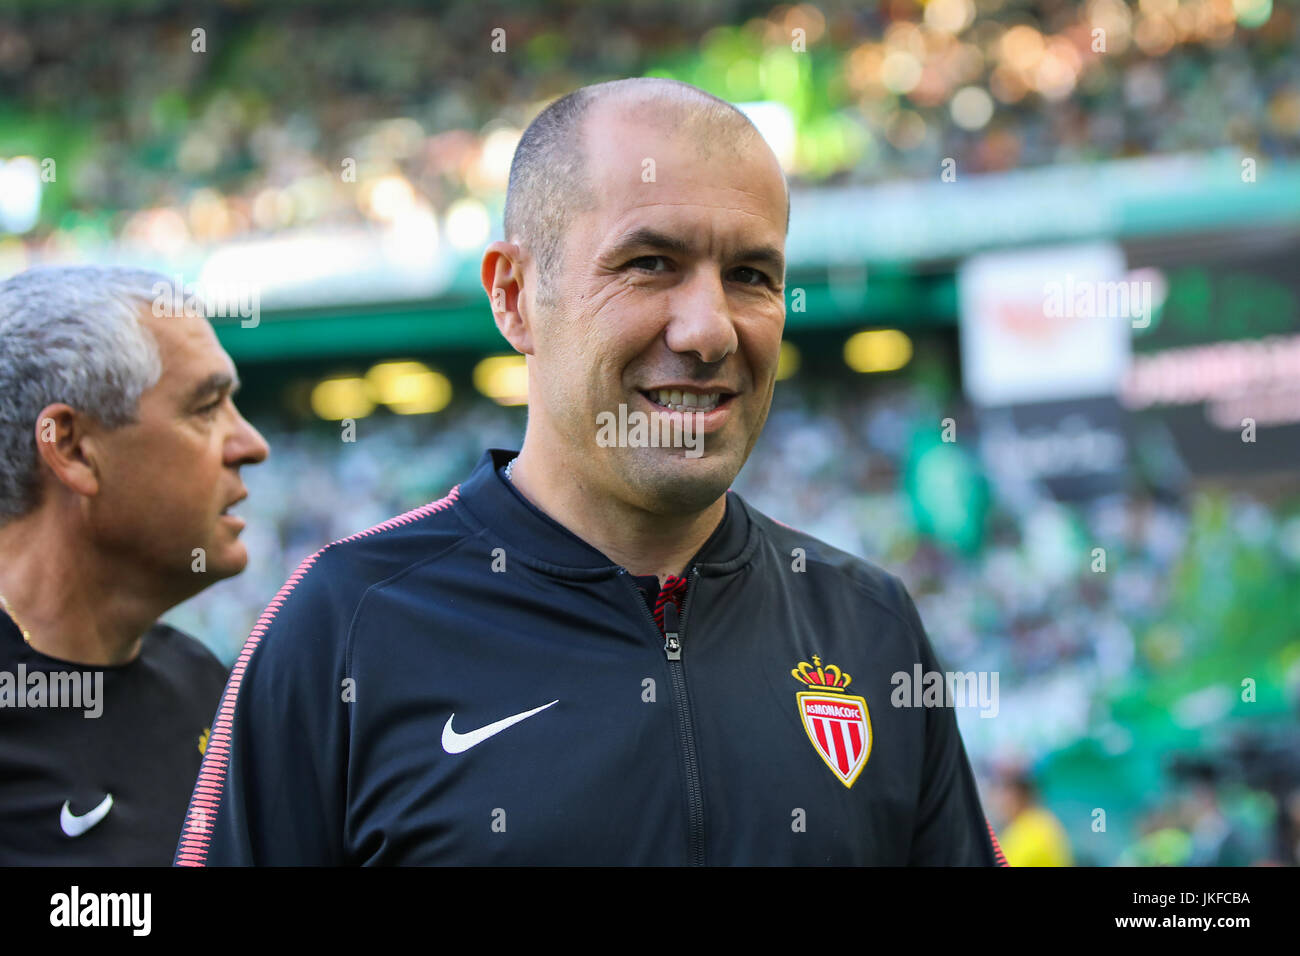 Lisbon, Portugal. 22nd July, 2017. Monaco«s head coach Leonardo Jardim from Portugal during the Pre-season Friendly match between Sporting CP and AS Monaco at Estadio Jose Alvalade on July 22, 2017 in Lisbon, Portugal.. Credit: Bruno Barros/Alamy Live News Stock Photo